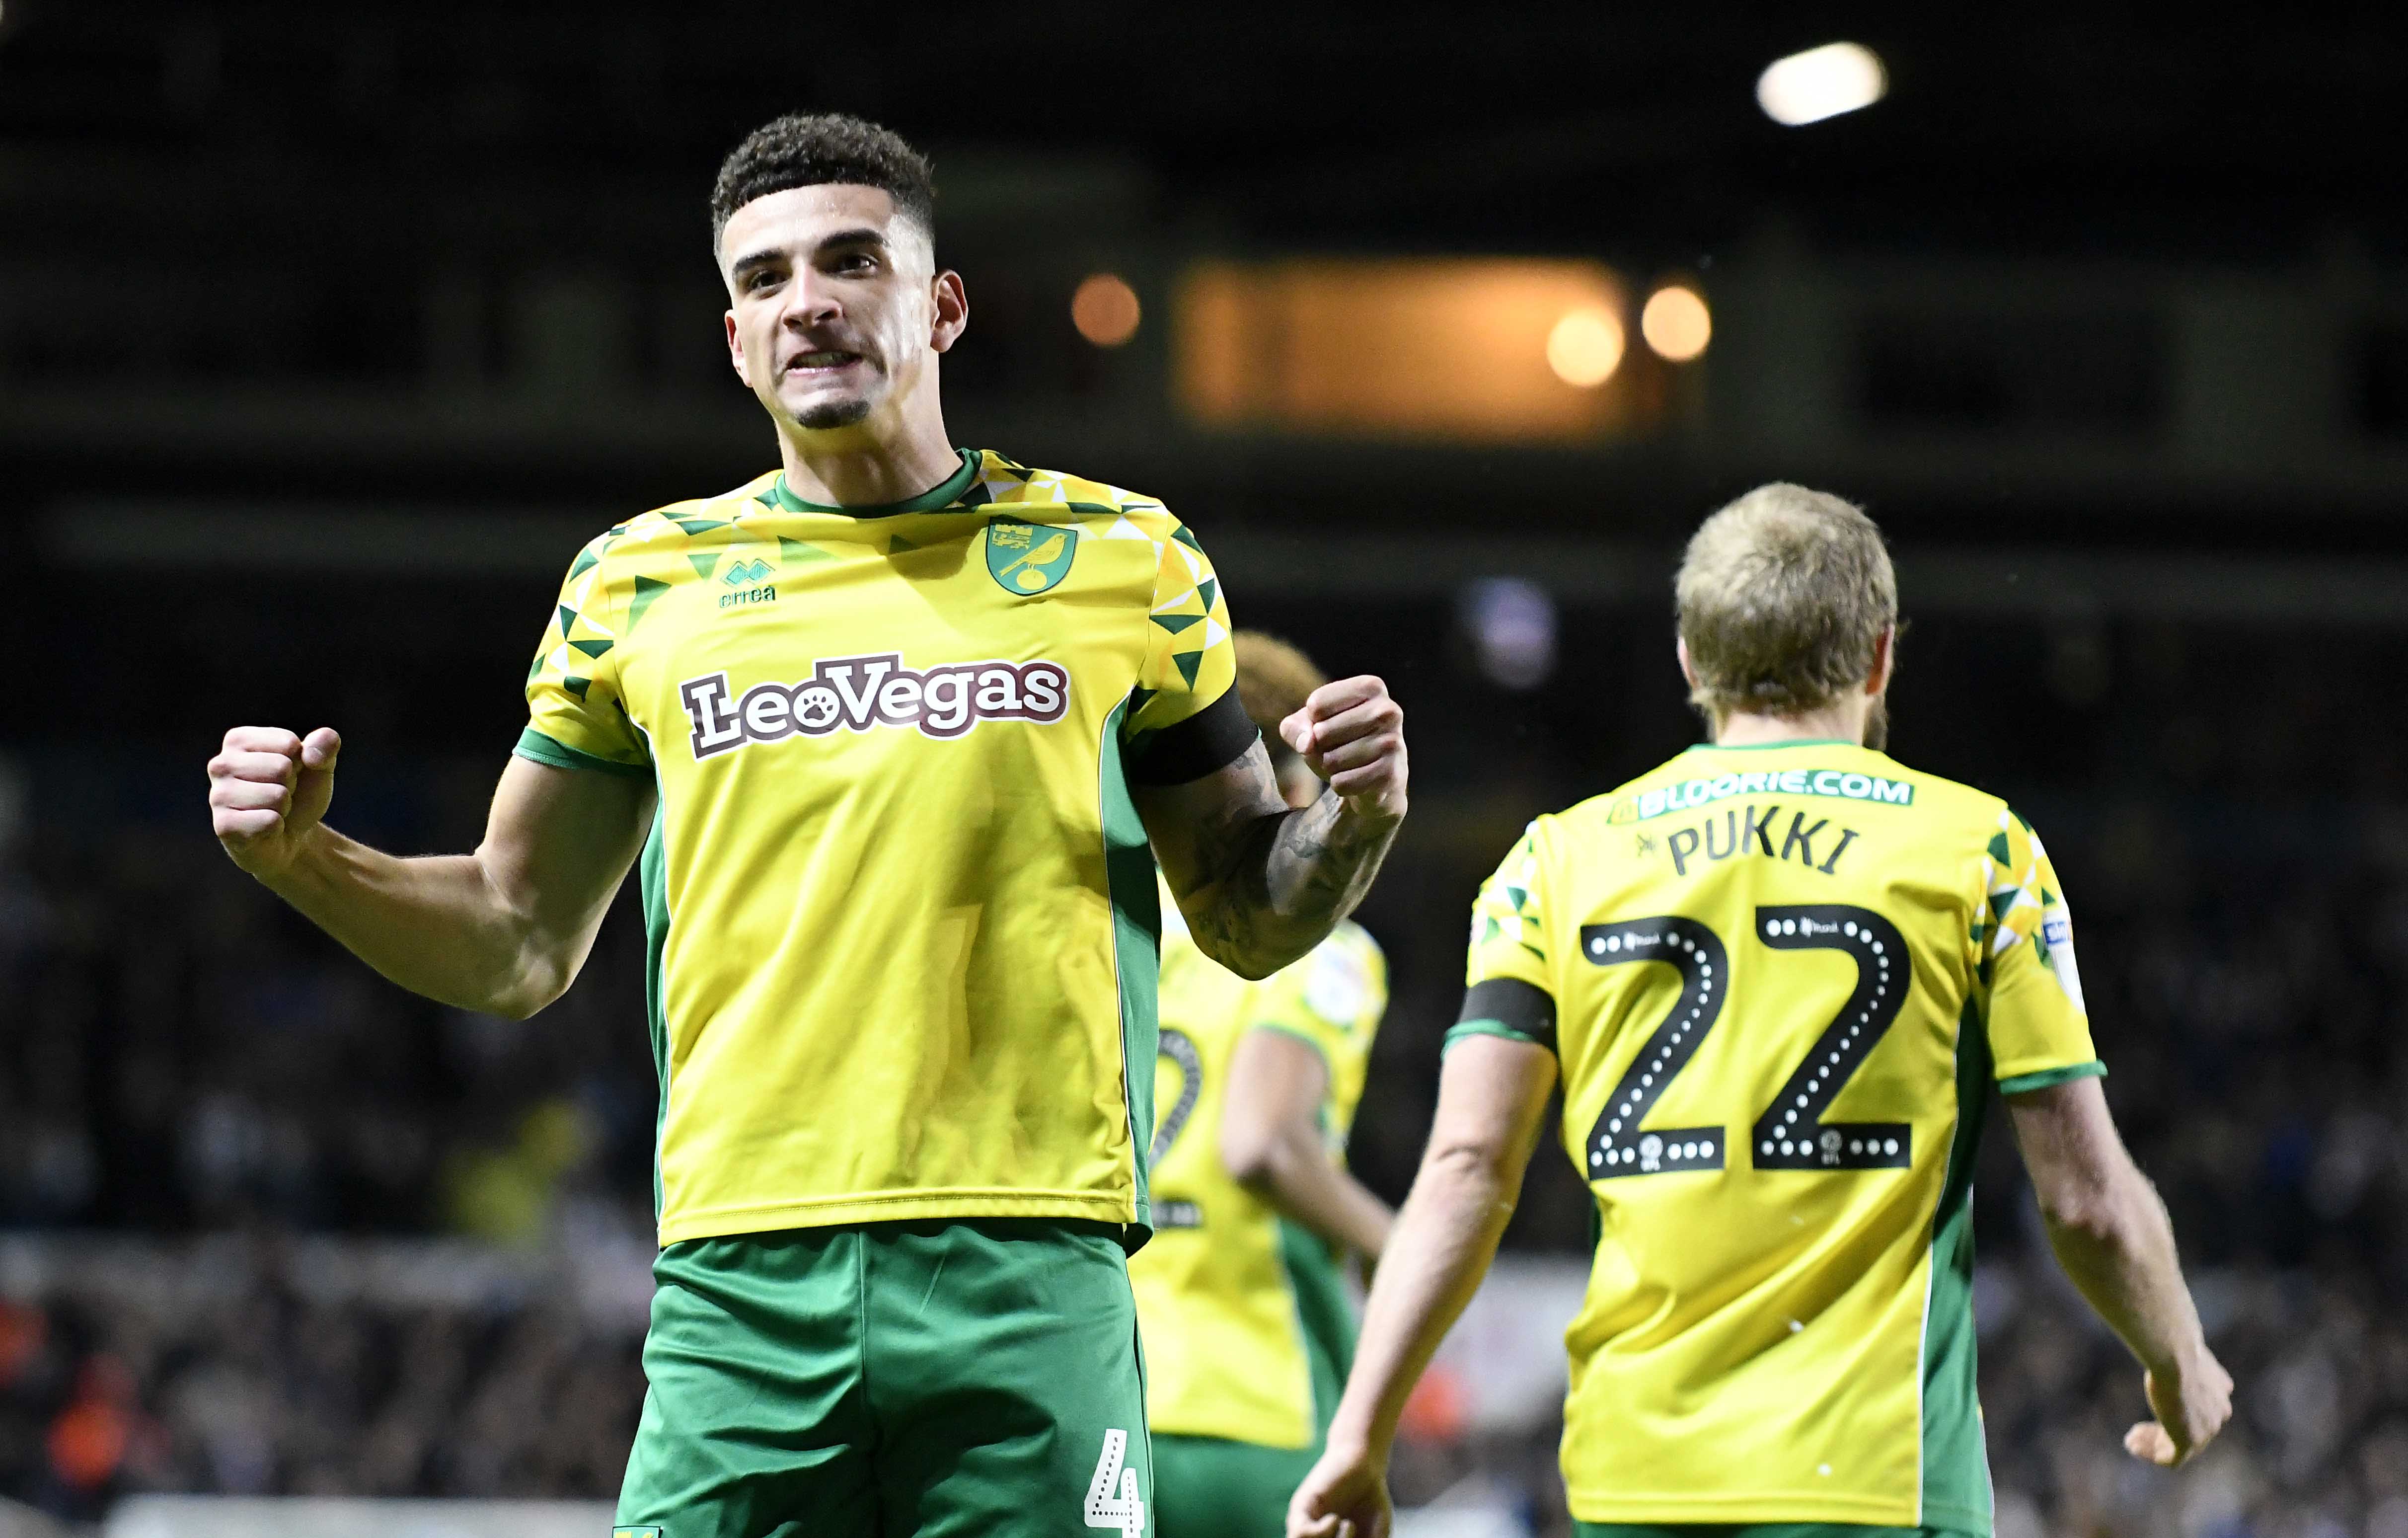 LEEDS, ENGLAND - FEBRUARY 02: Ben Godfrey of Norwich City celebrates his sides second goal scored by Teemu Pukki during the Sky Bet Championship match between Leeds United and Norwich City at Elland Road on February 02, 2019 in Leeds, England. (Photo by George Wood/Getty Images)